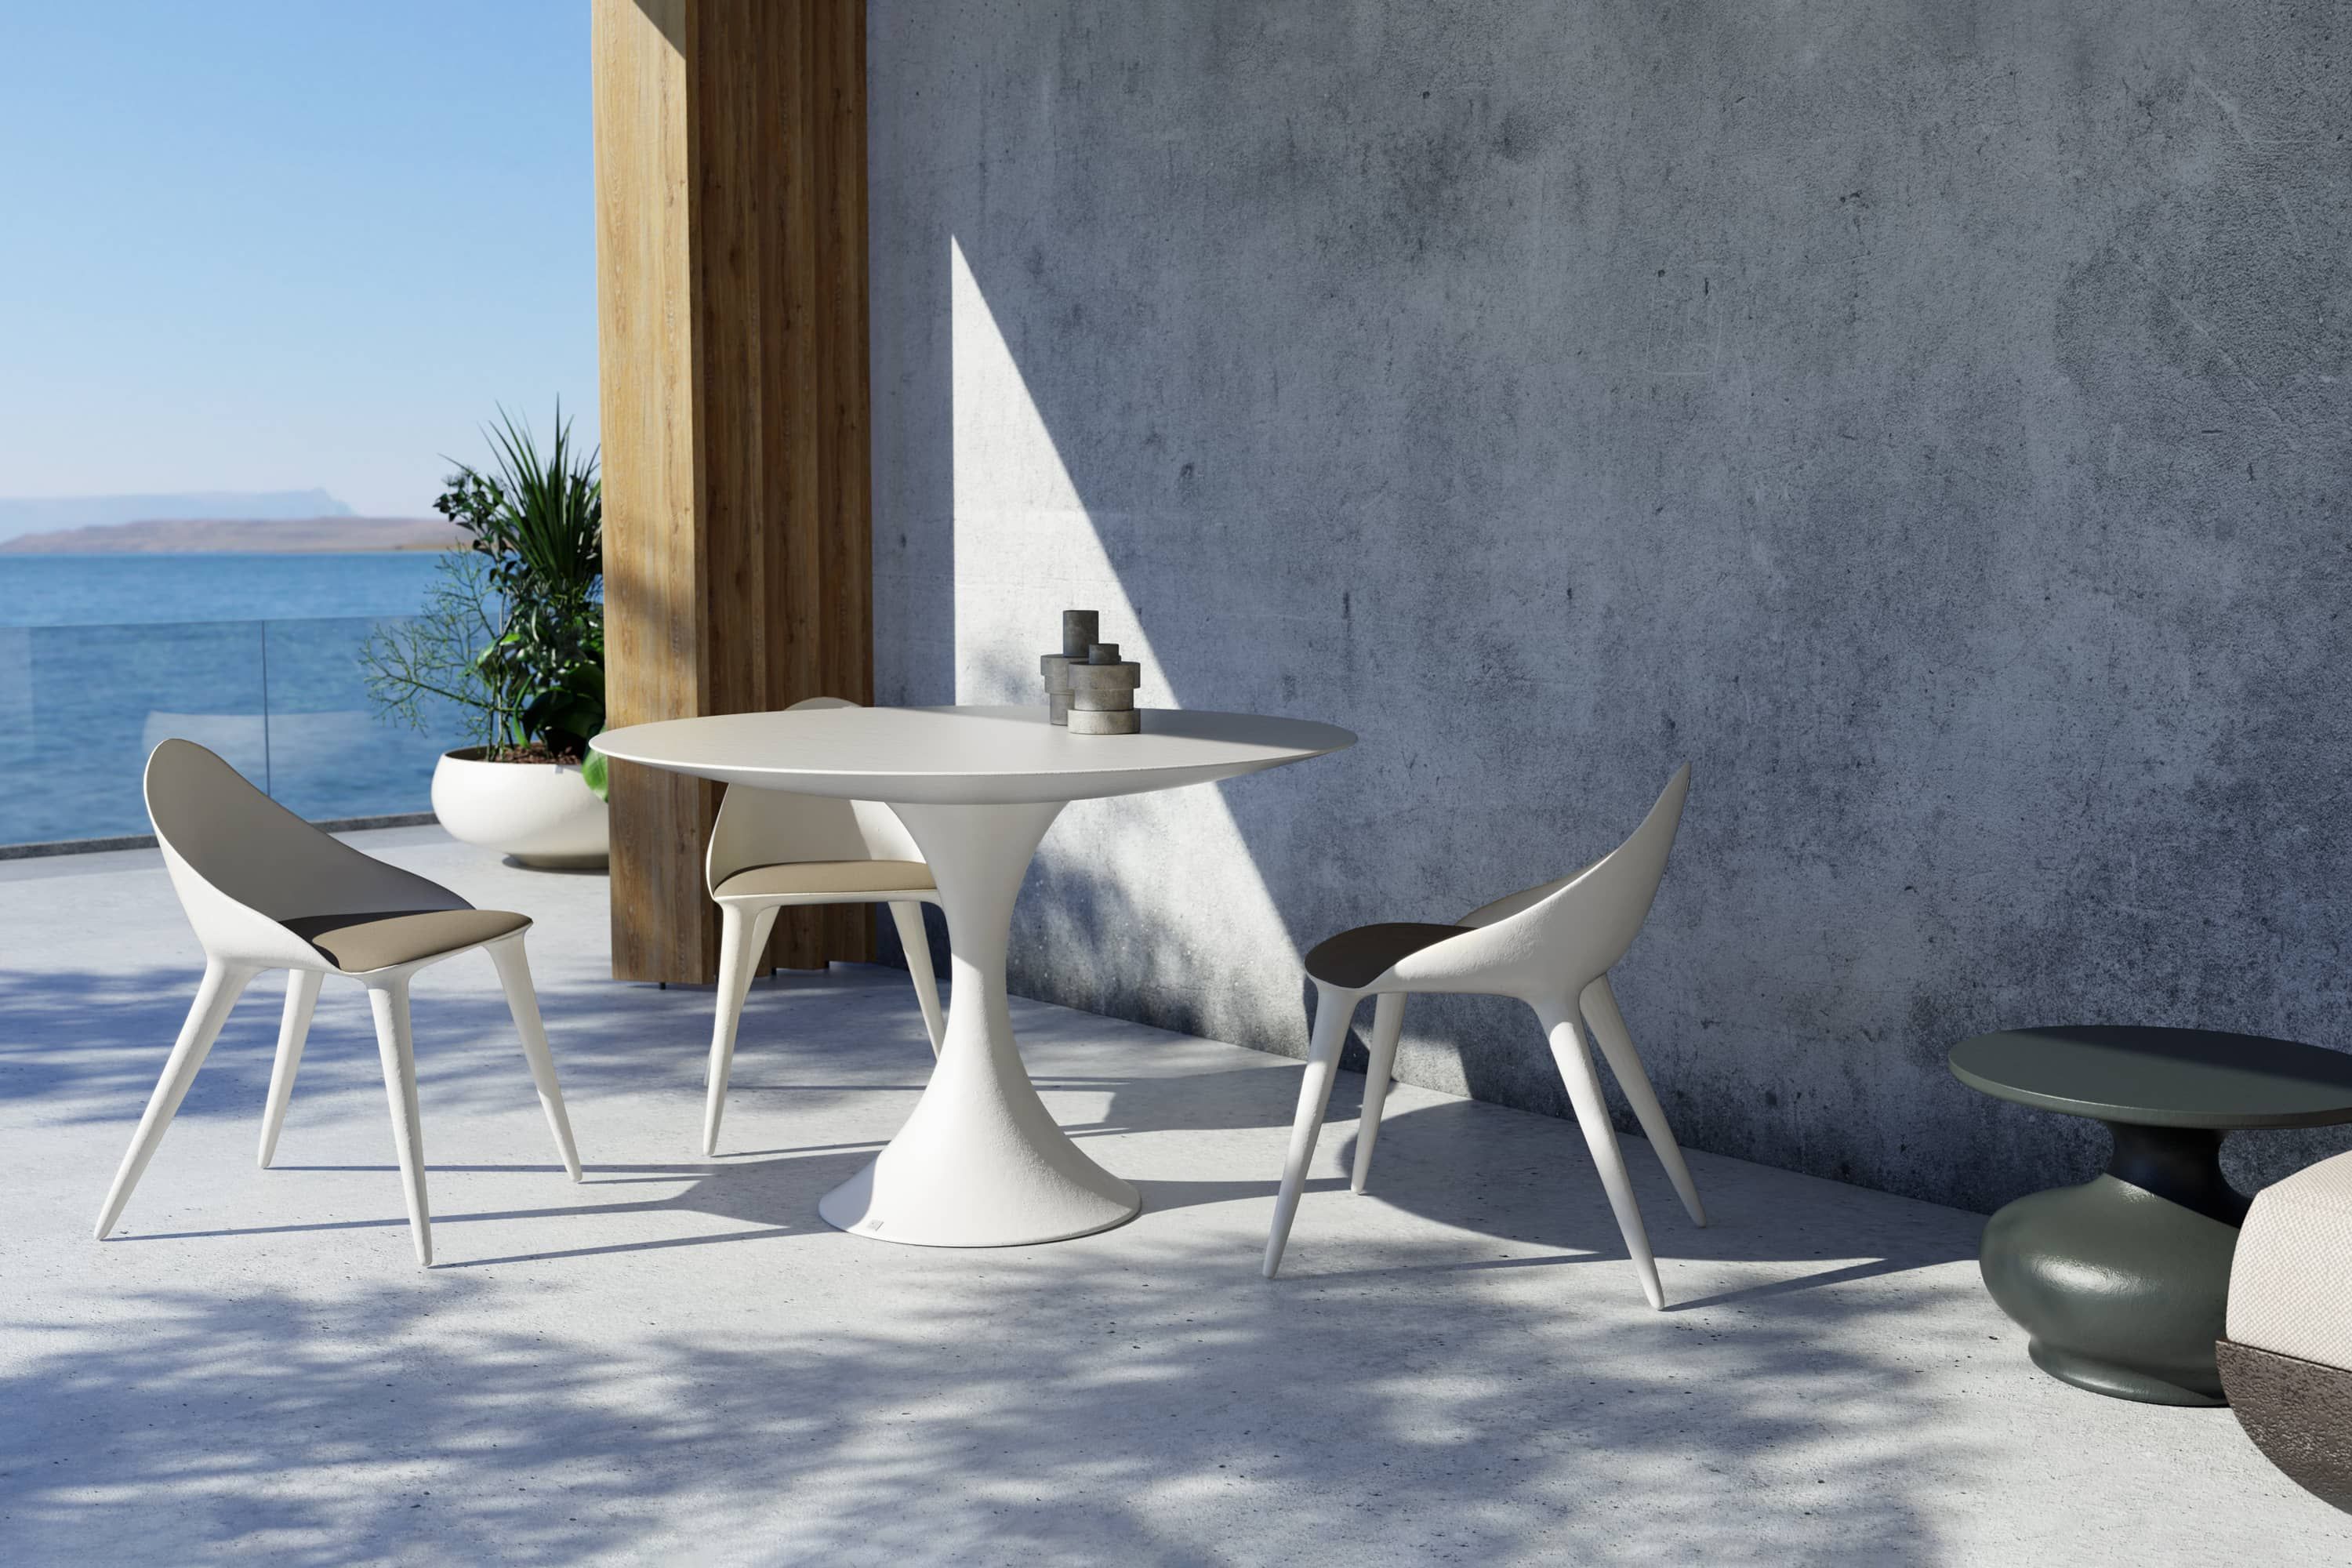 Jade dining table and Mónaco chairs with cushion for outdoor